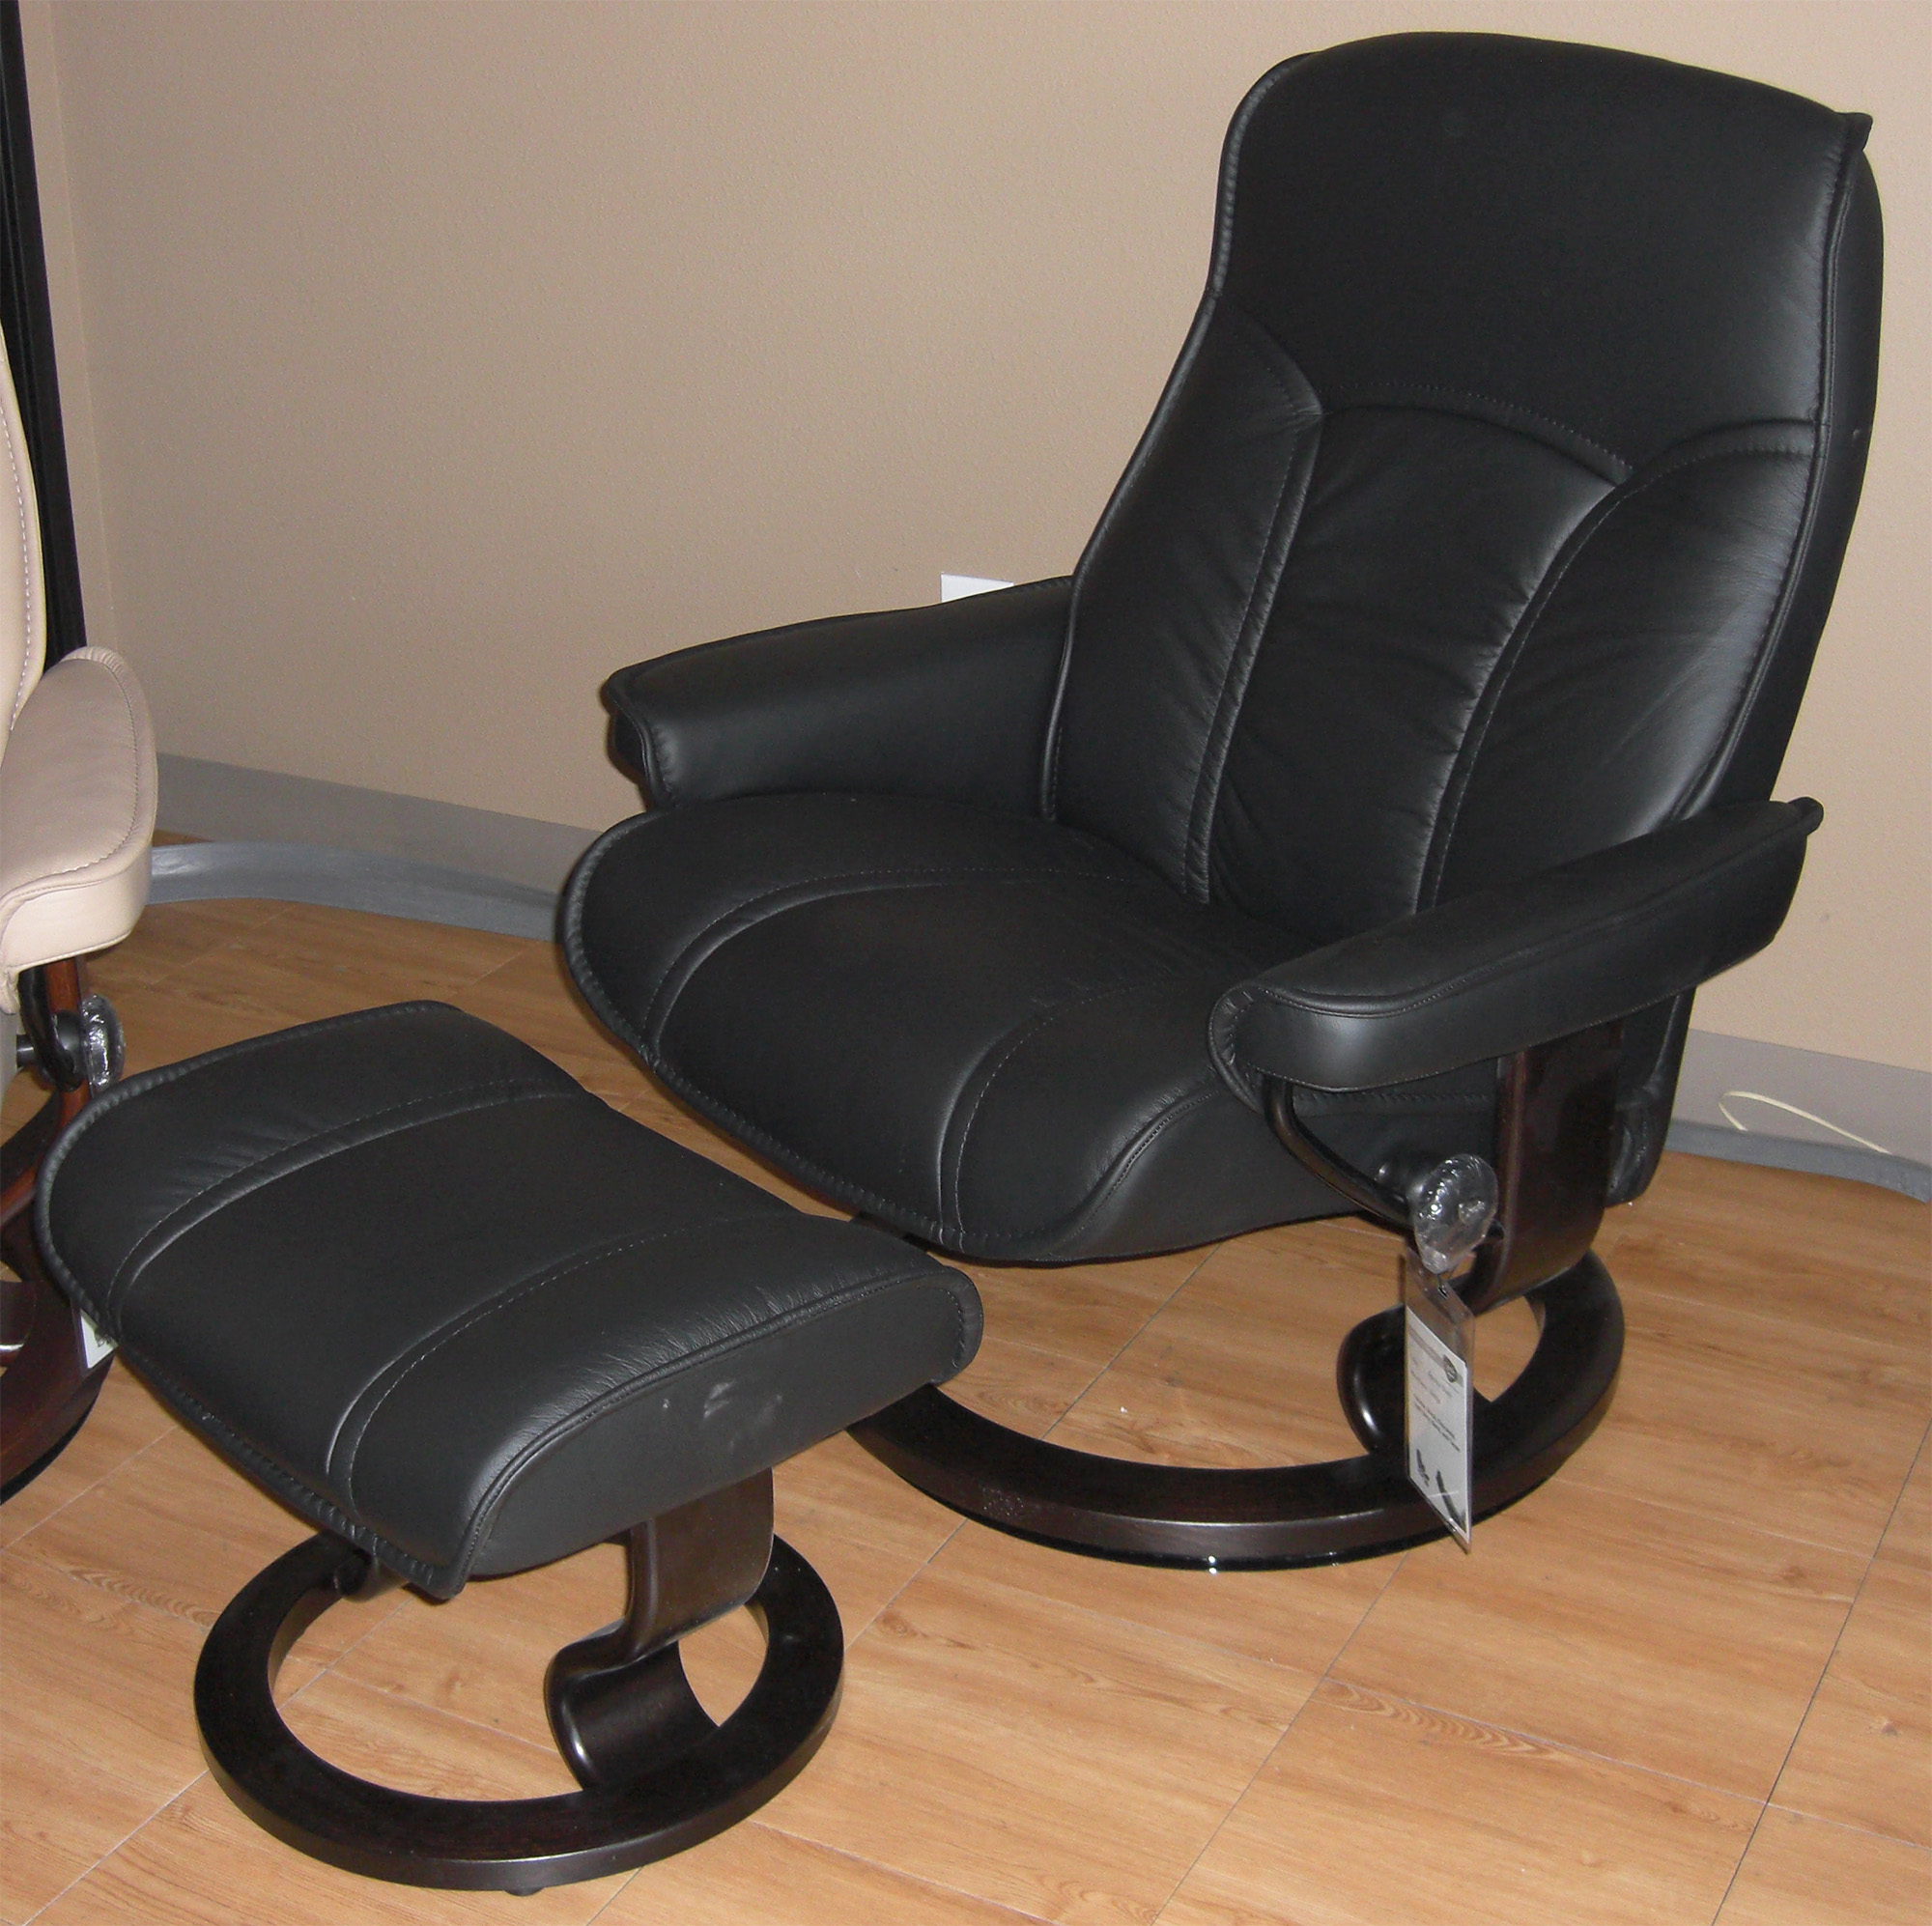 Leather Recliner Chair, Black Leather Recliner With Ottoman